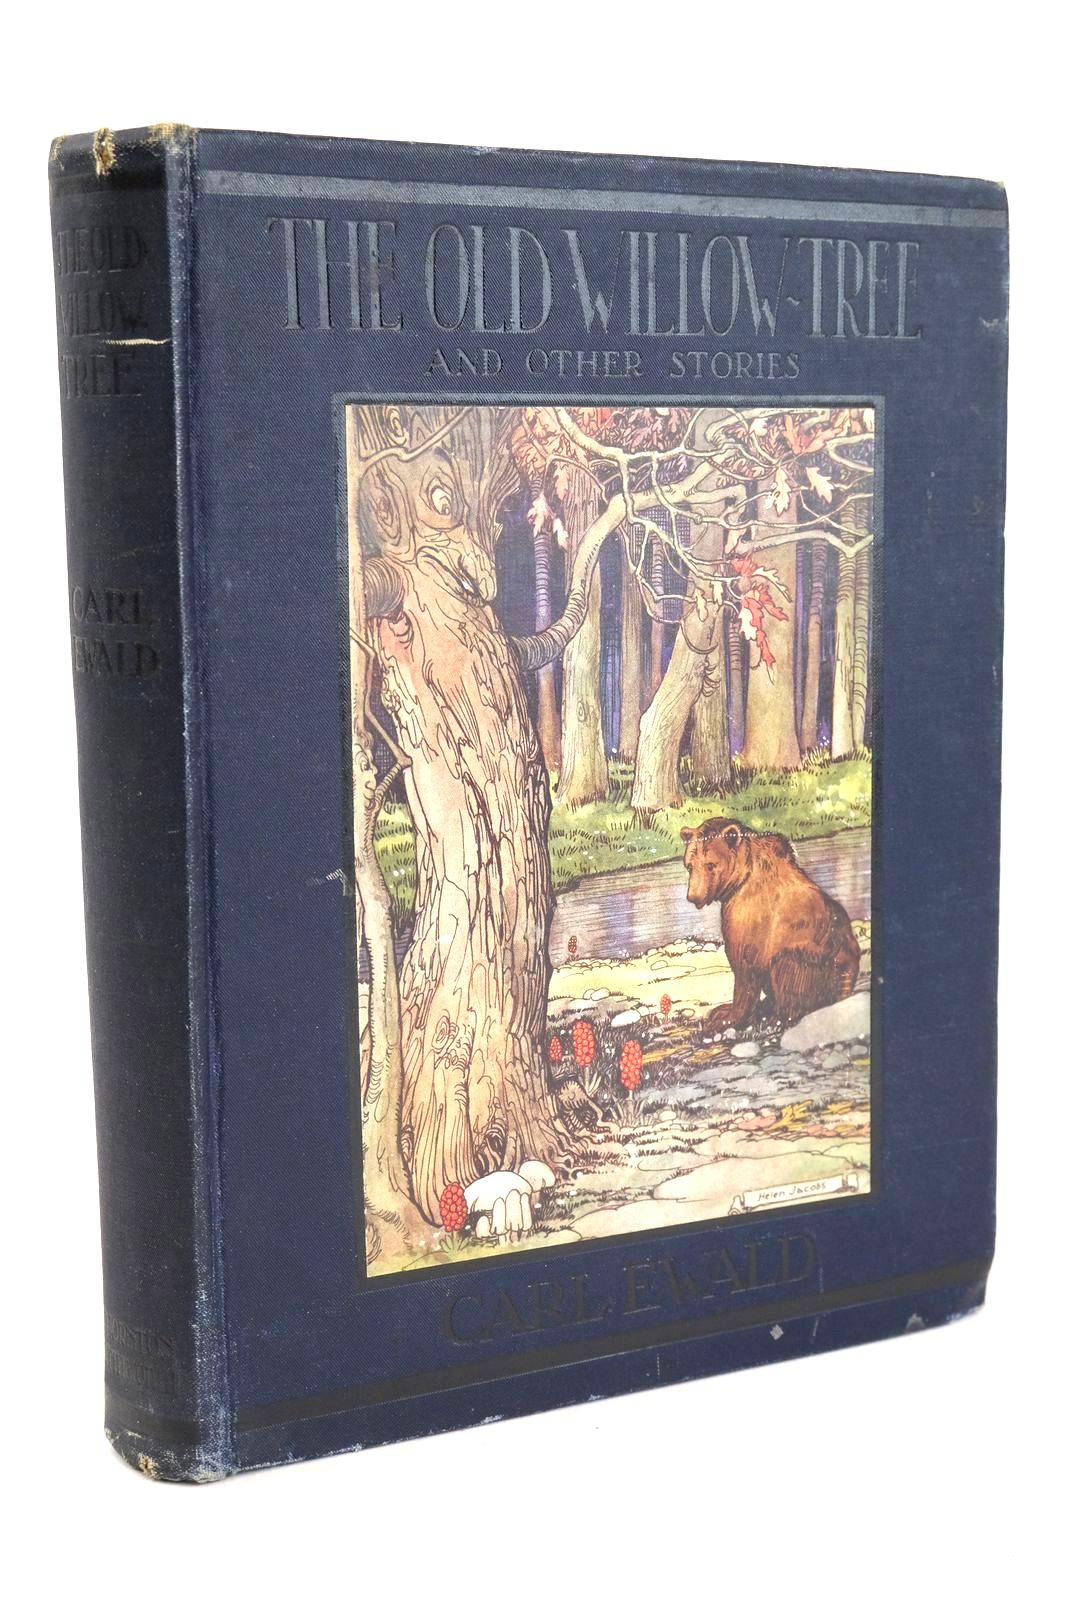 Photo of THE OLD WILLOW TREE AND OTHER STORIES written by Ewald, Carl illustrated by Jacobs, Helen Lee, G.E. published by Thornton Butterworth Ltd. (STOCK CODE: 1325897)  for sale by Stella & Rose's Books